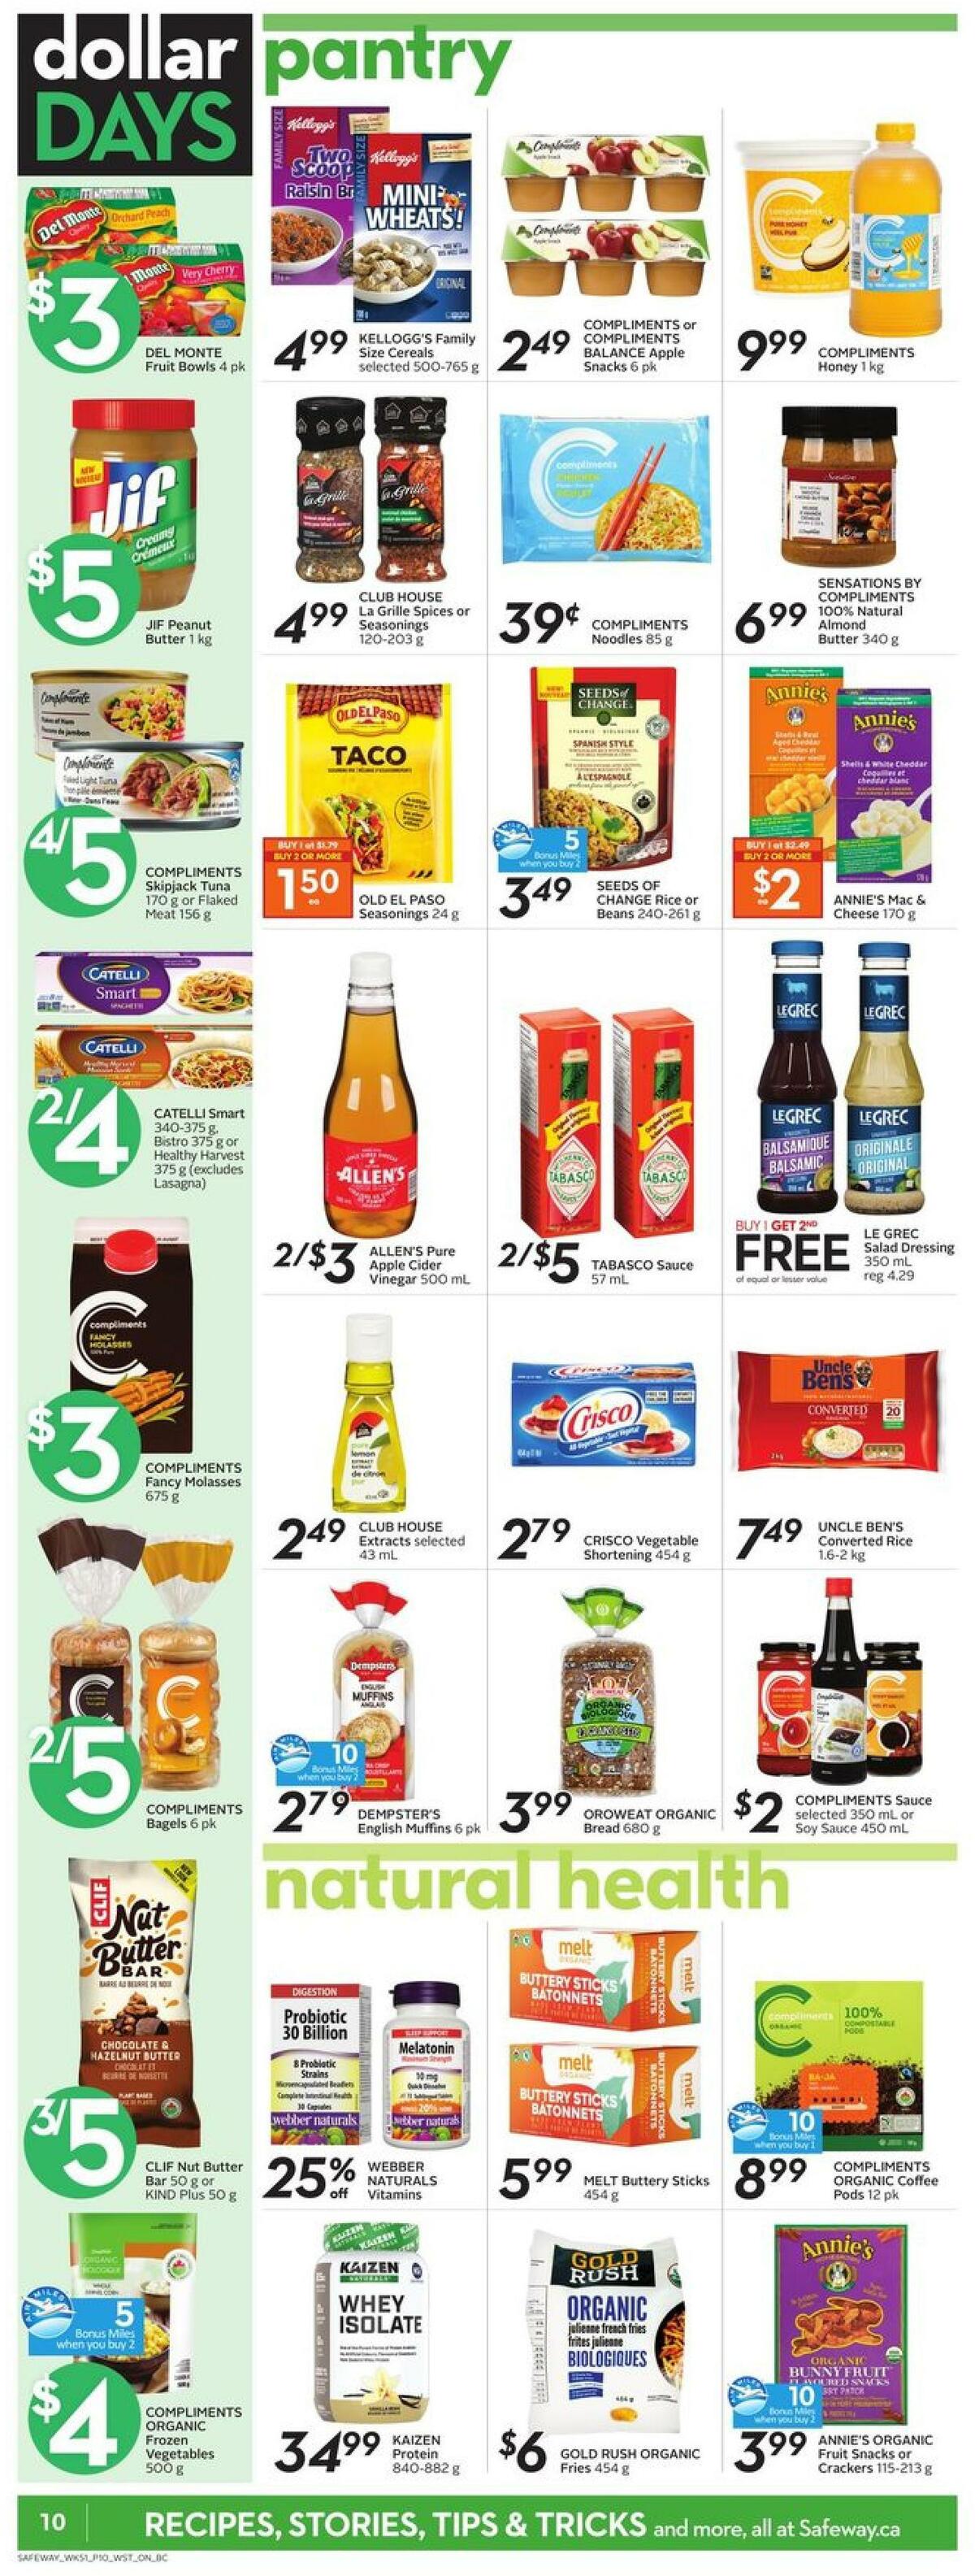 Safeway Flyer from April 15